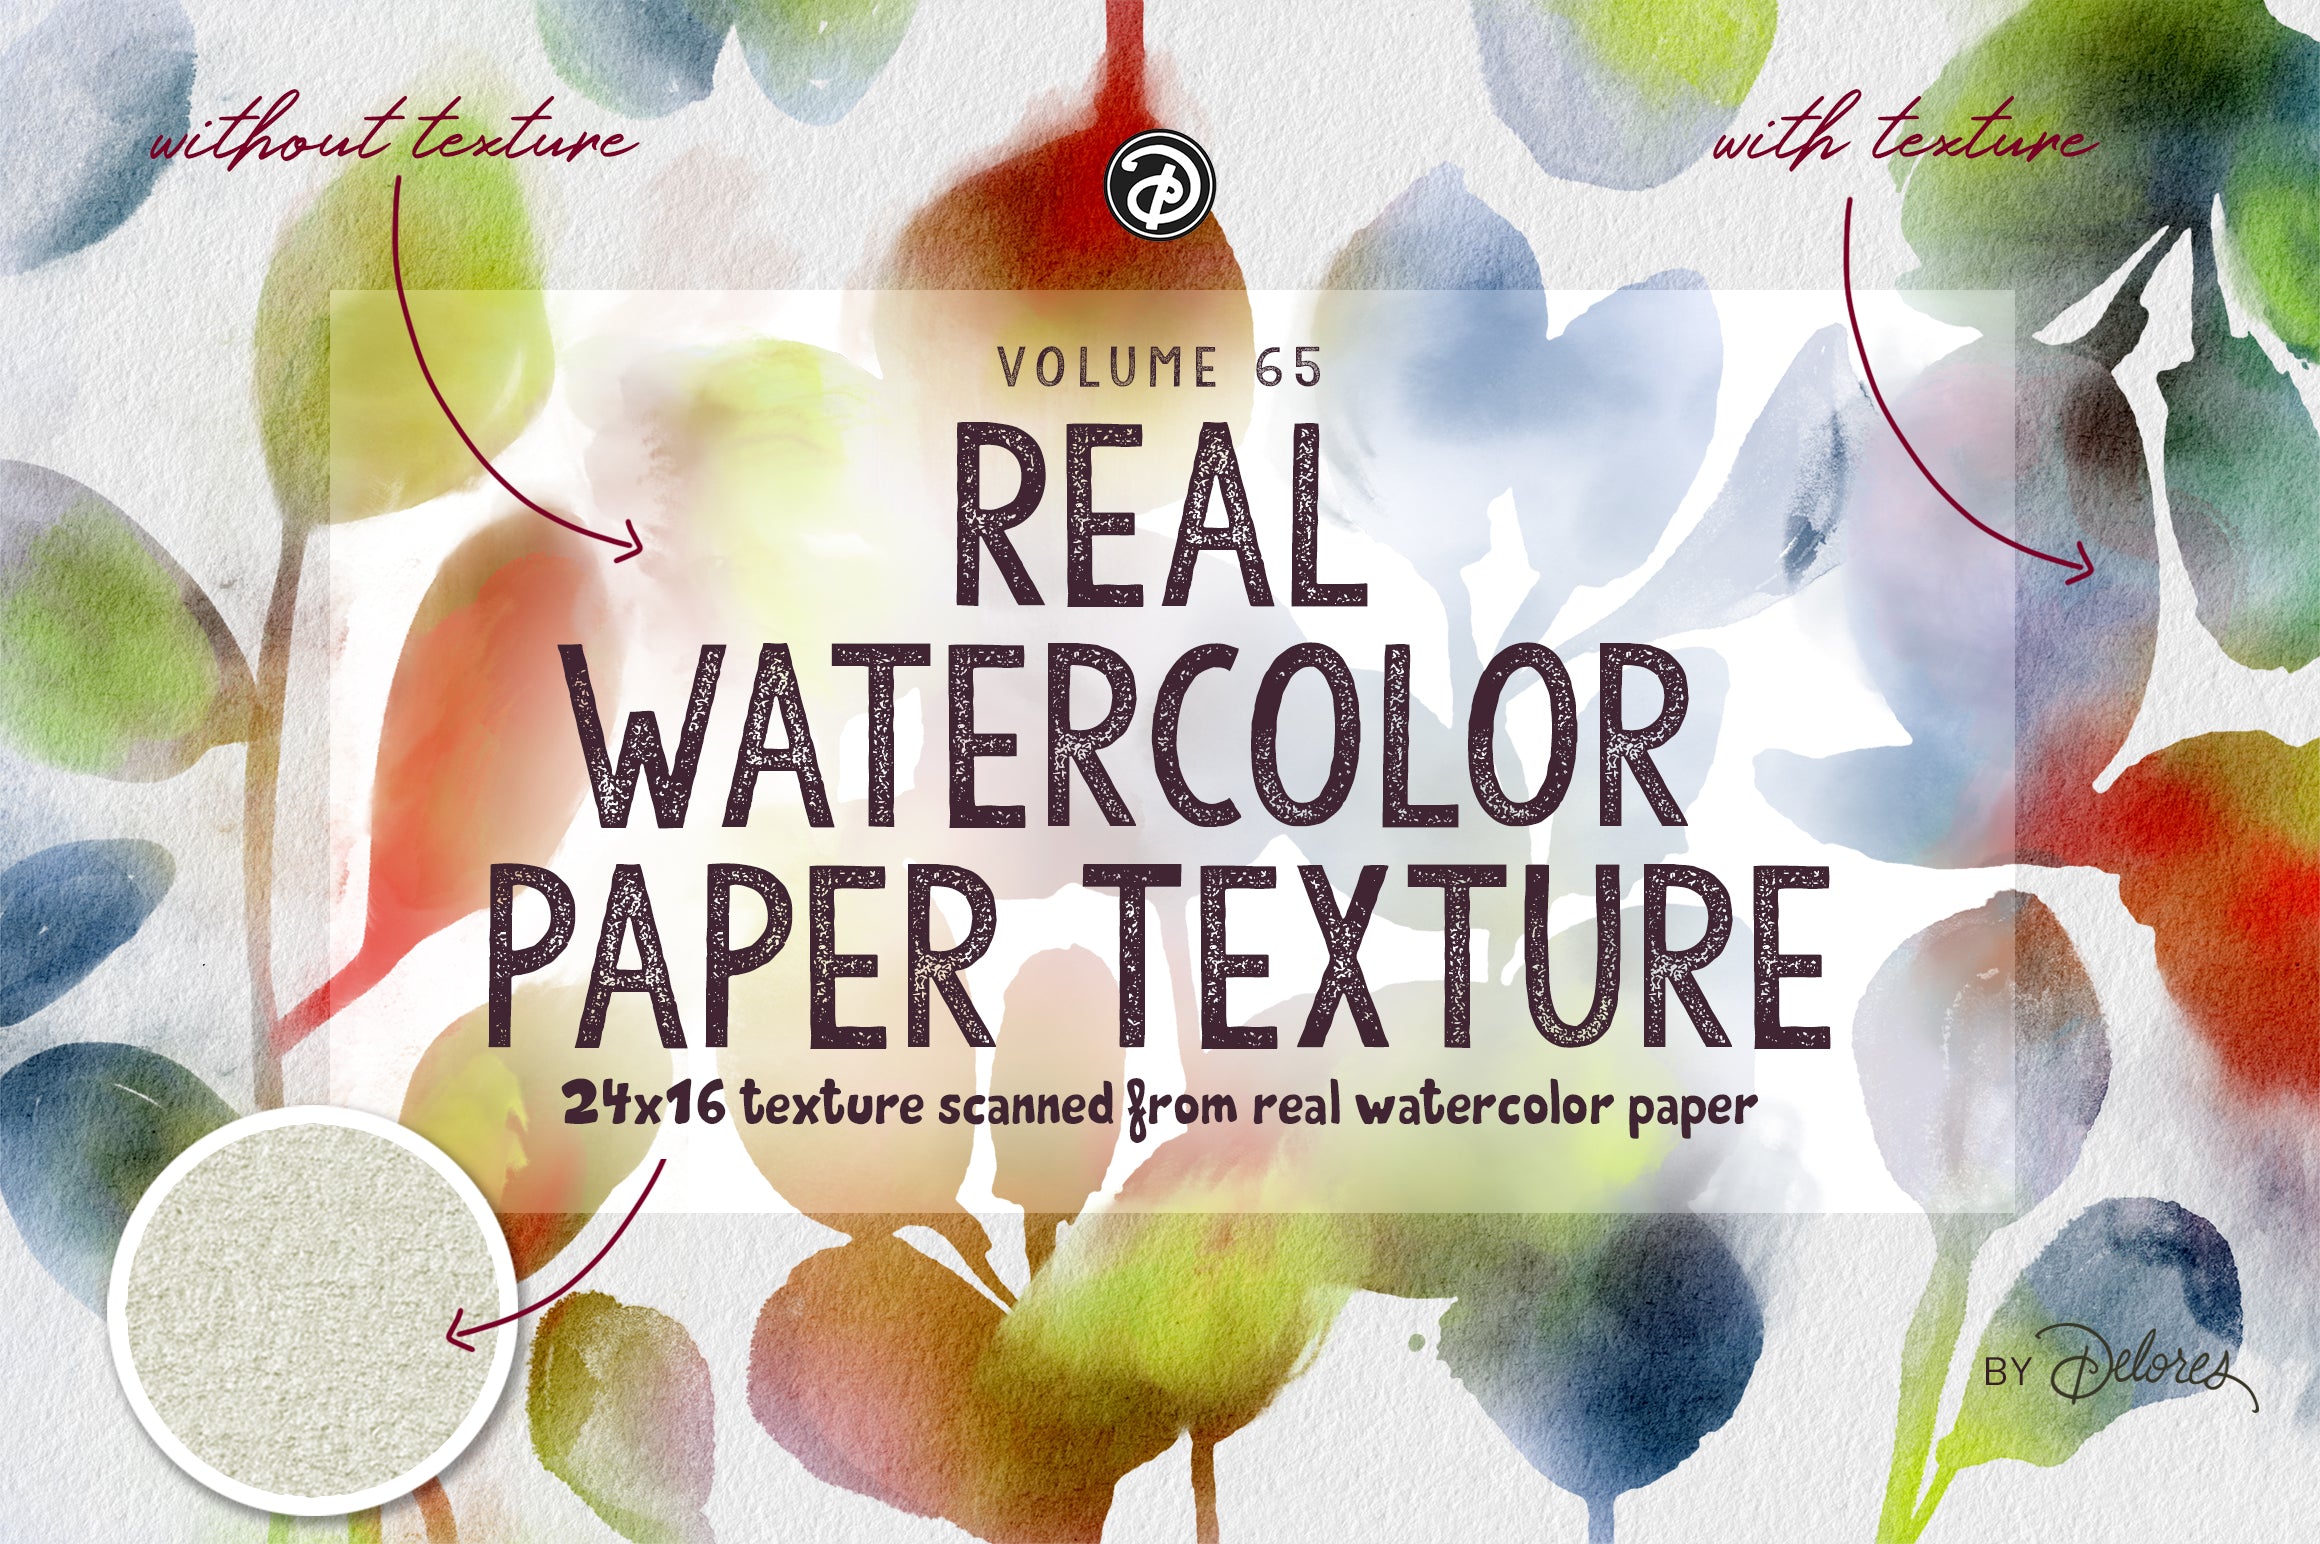 Volume 65 - Real Watercolor Paper Texture - 24 x 16"